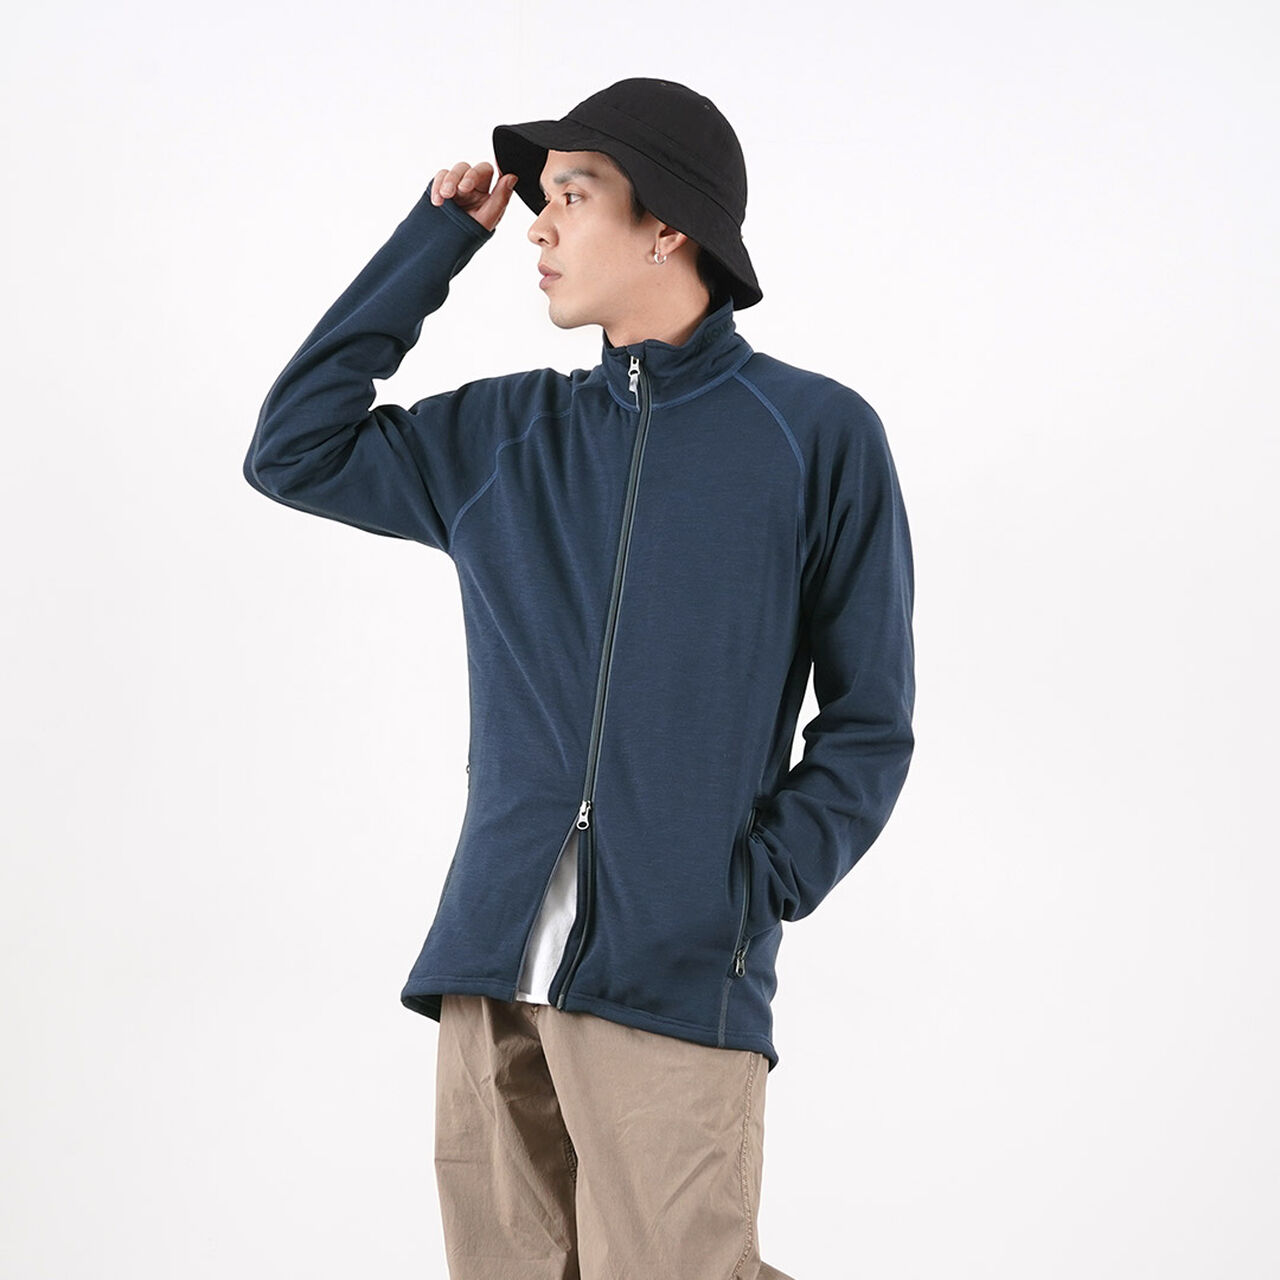 Ms Outright Jacket,CloudyBlue, large image number 0